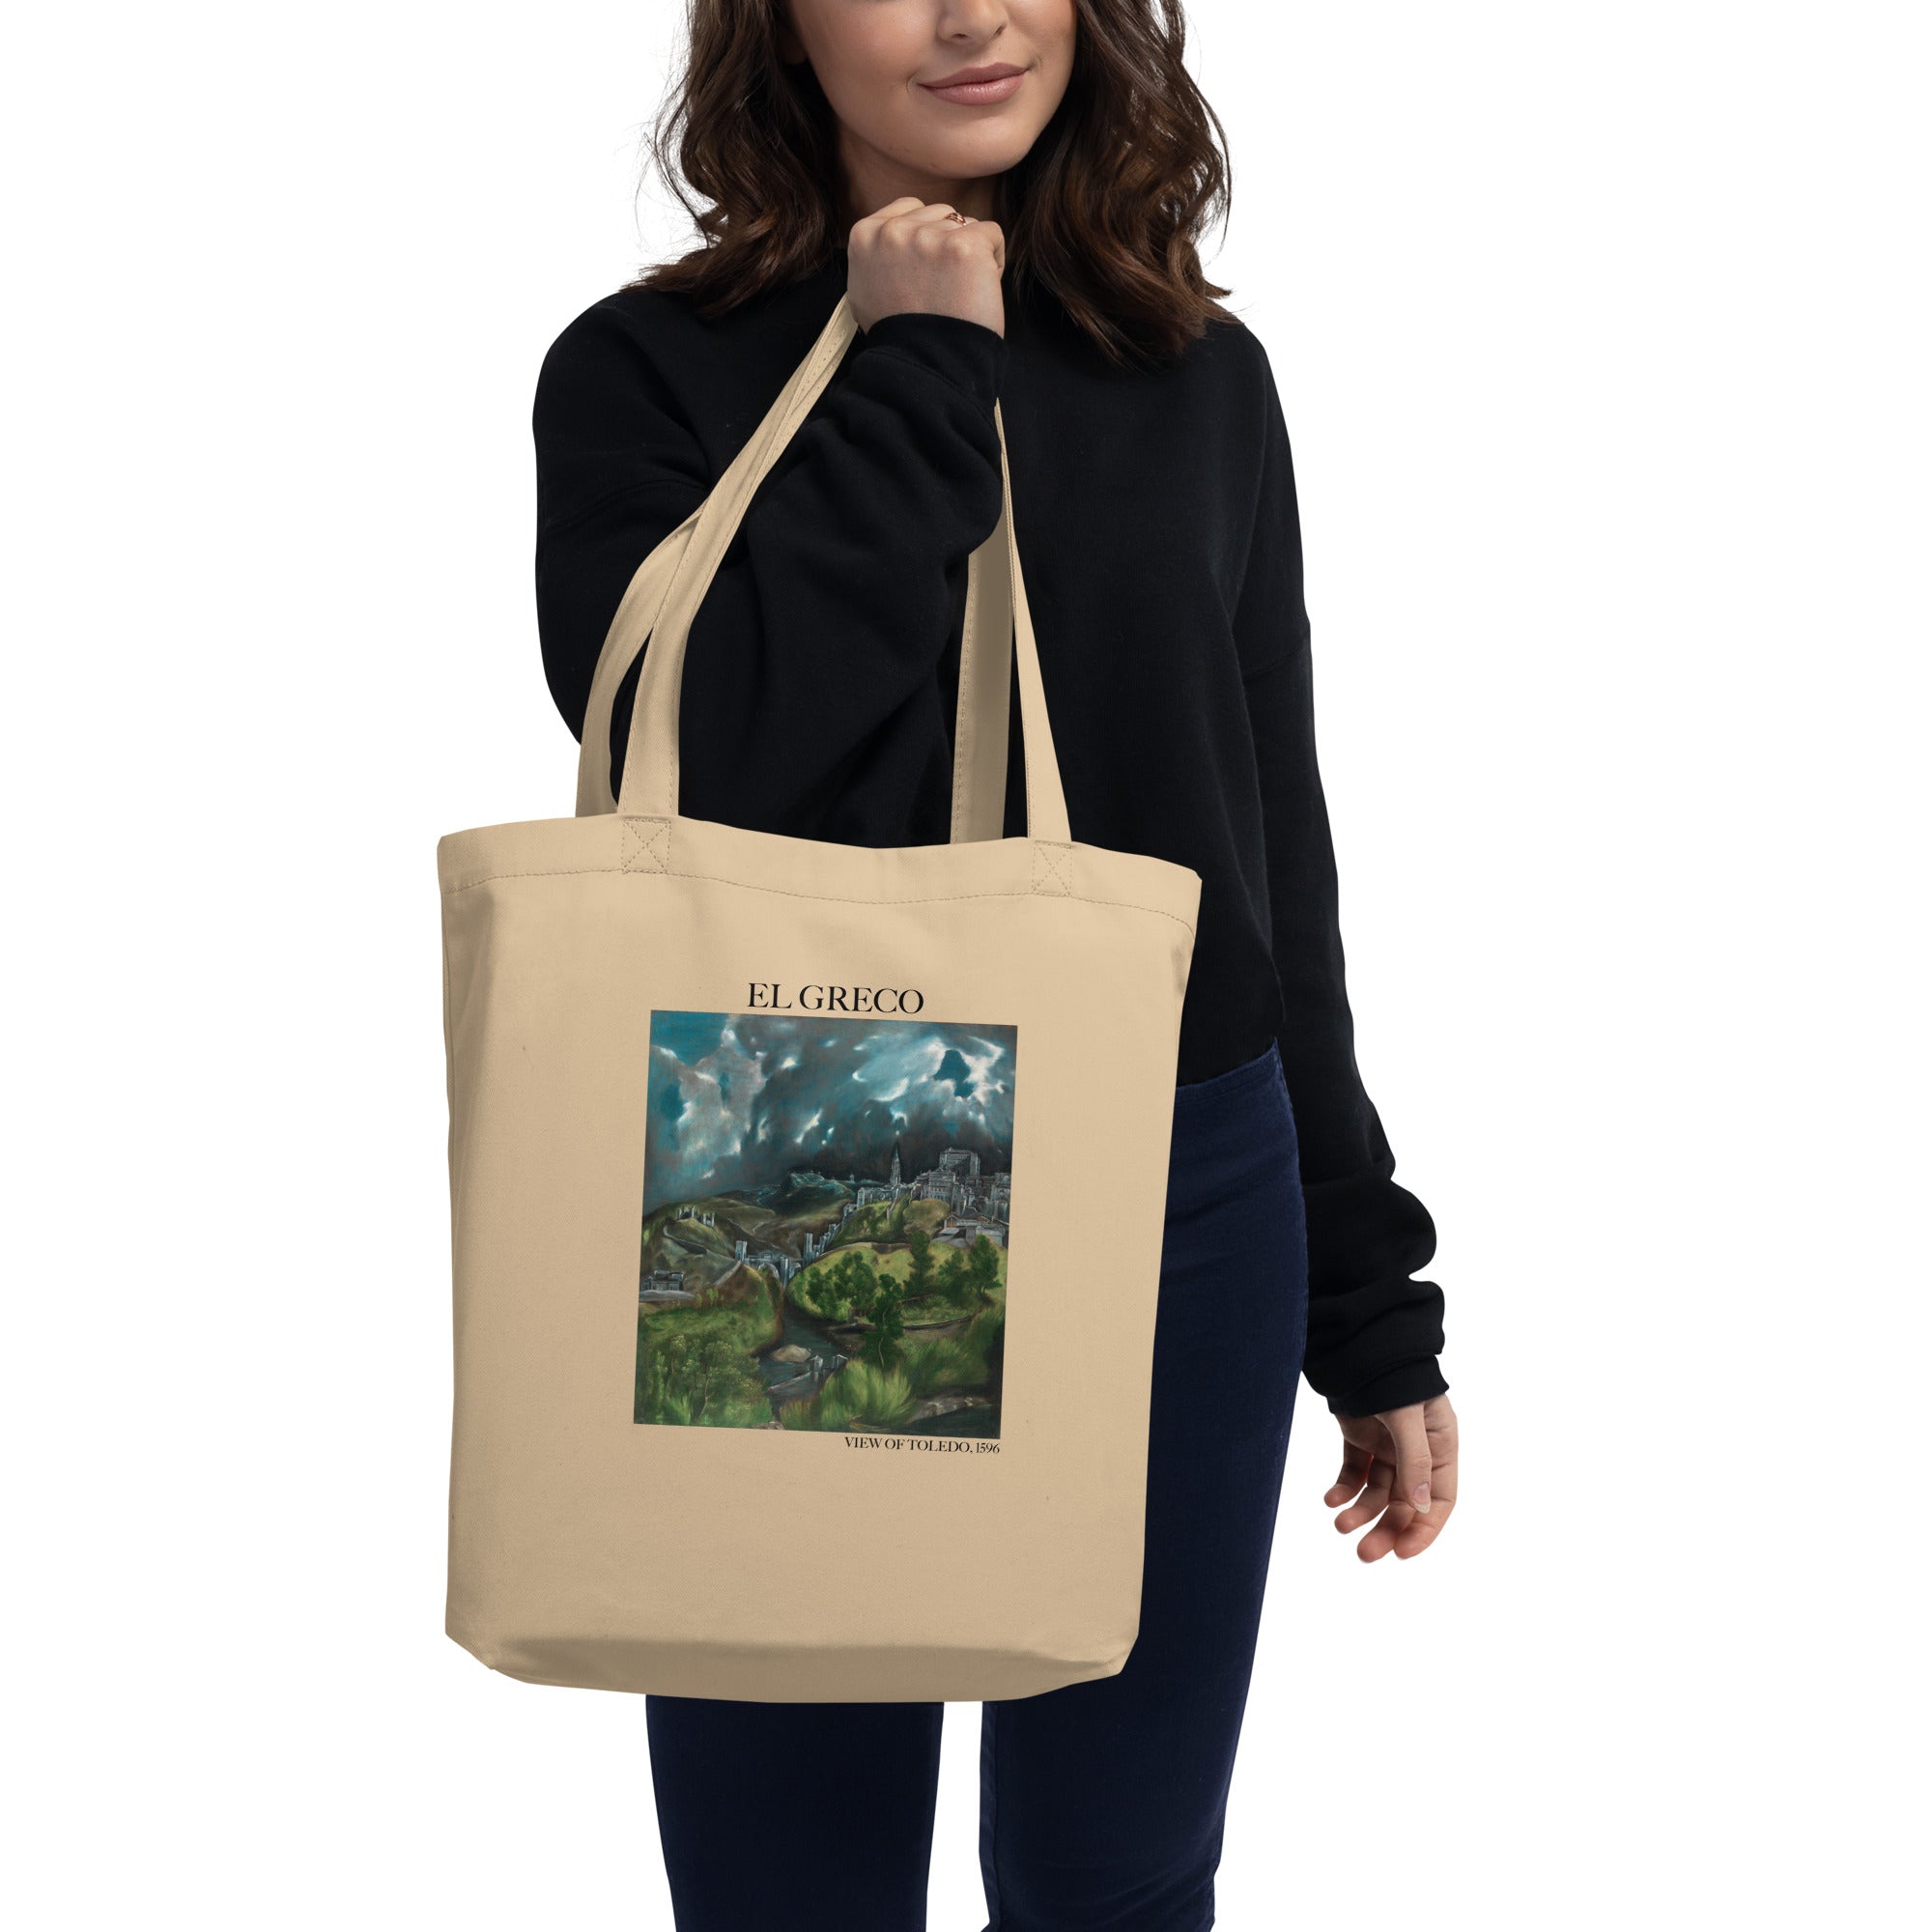 El Greco 'View of Toledo' Famous Painting Totebag | Eco Friendly Art Tote Bag